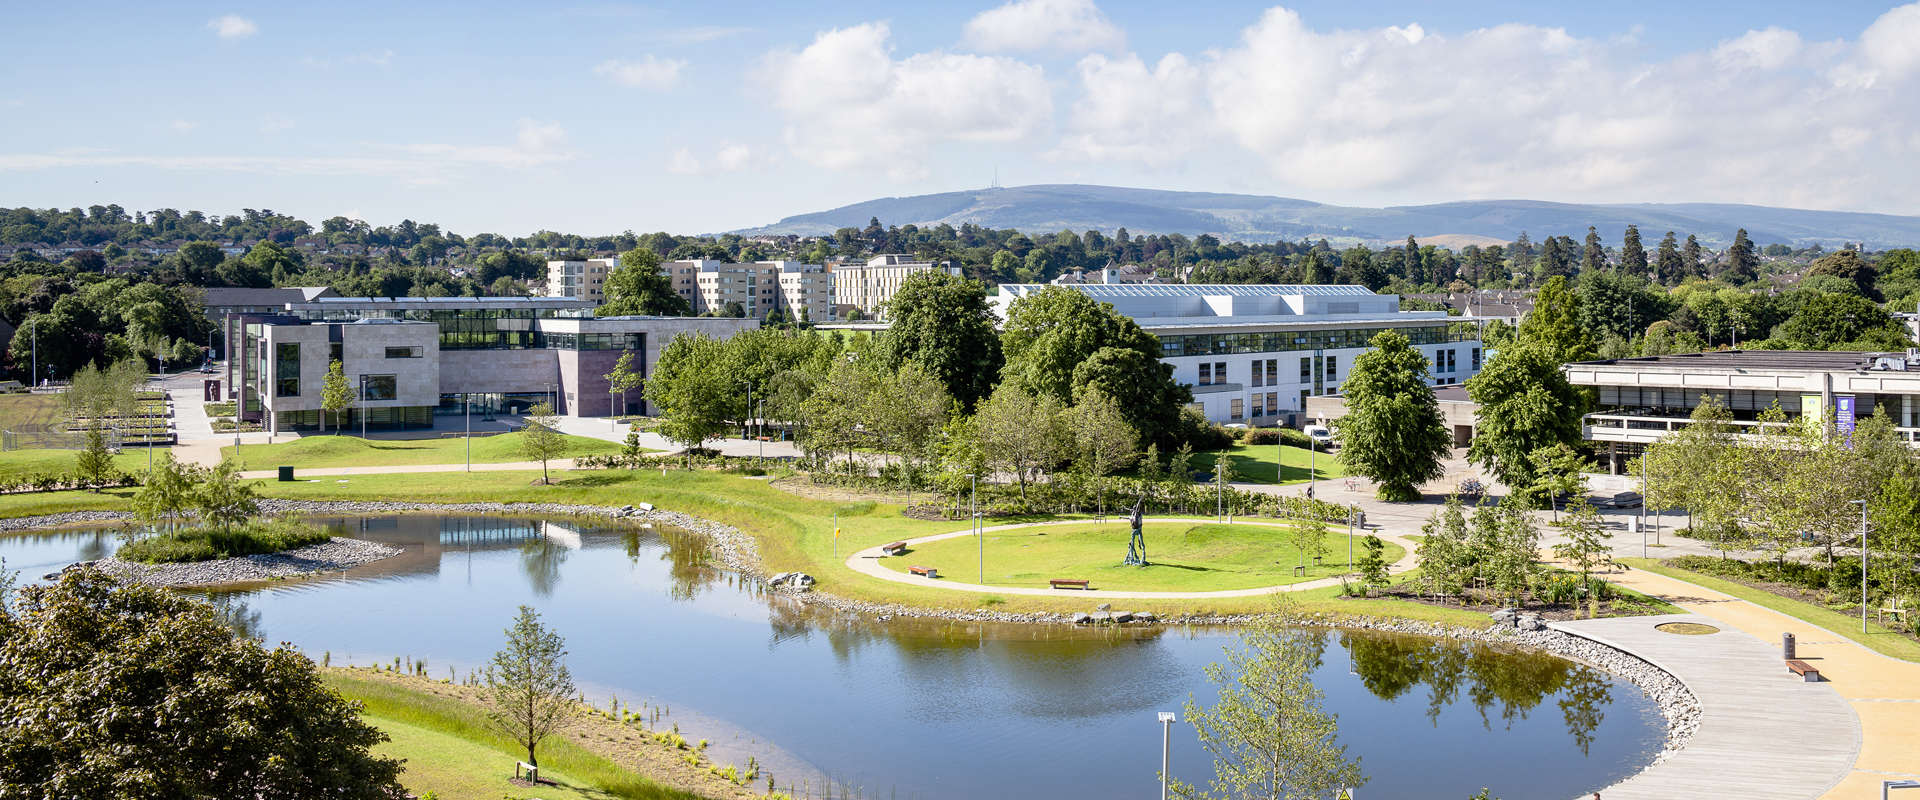 Image of the UCD campus